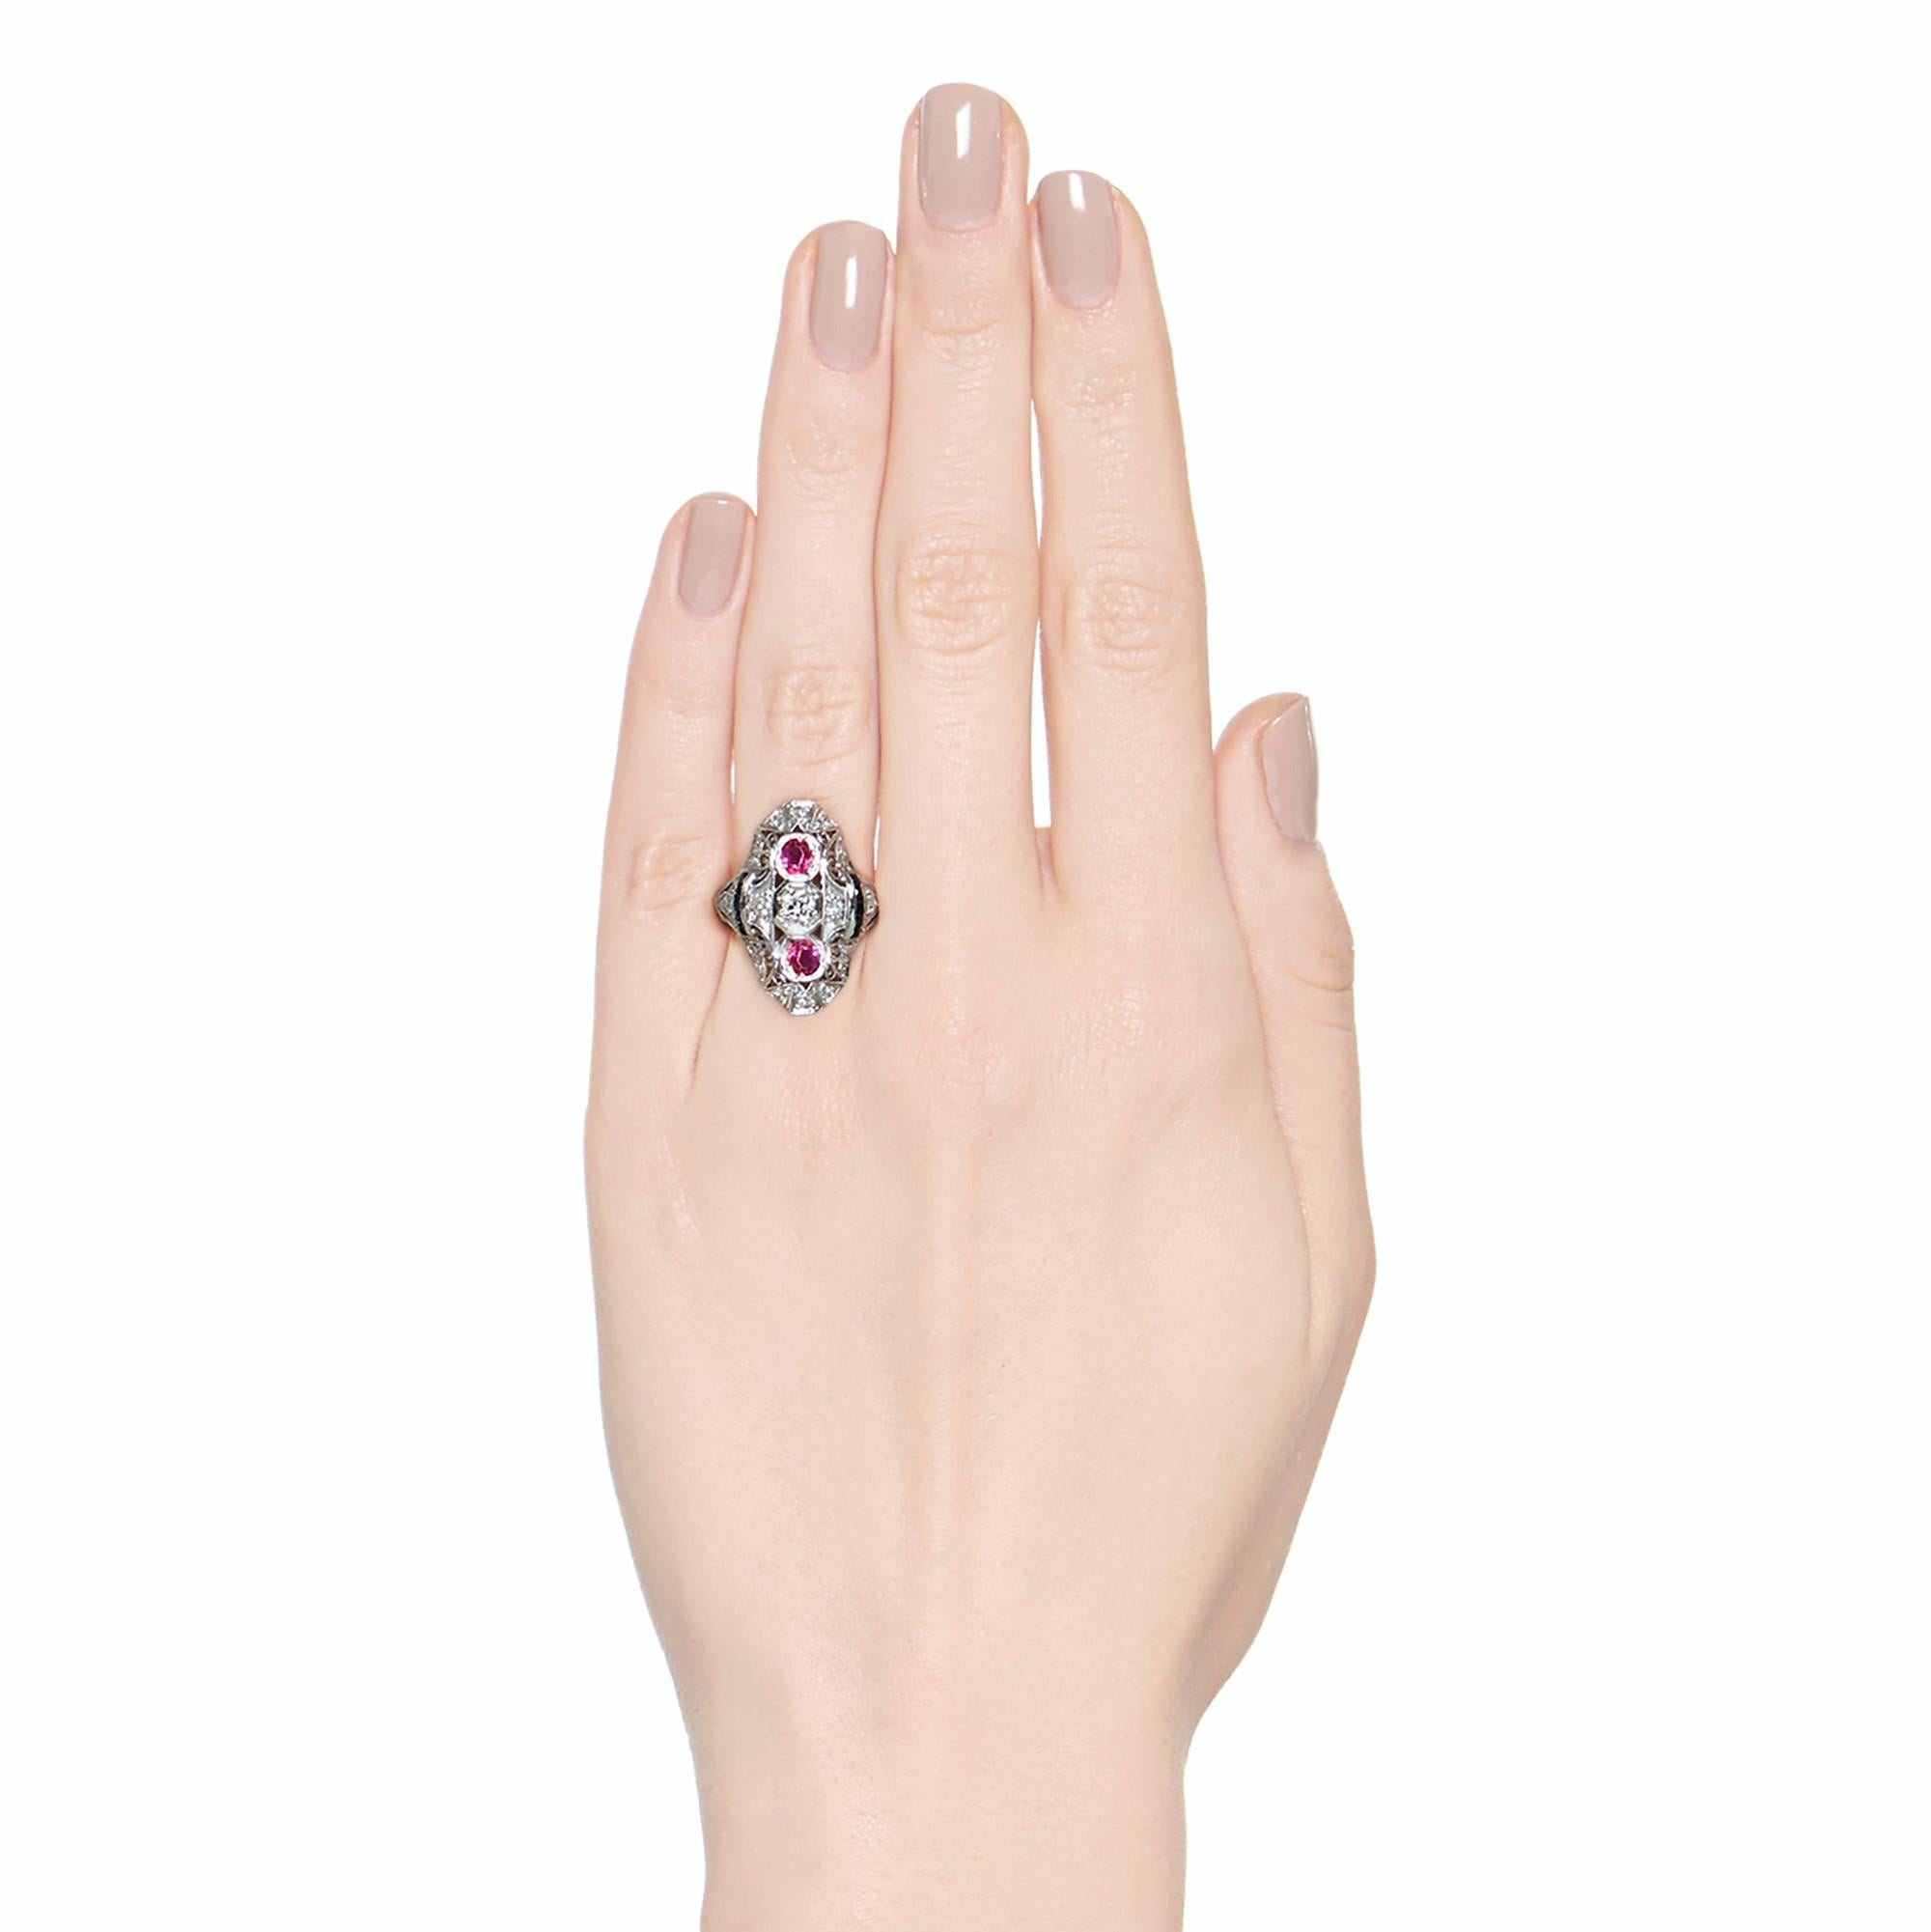 What a statement ring this is!

A trio of rubies and diamonds are bezel set in a vertical orientation, and accented by some intricate filigree work, accented by old cut melee diamonds.

Adorable swirl motif design details add some lightness and